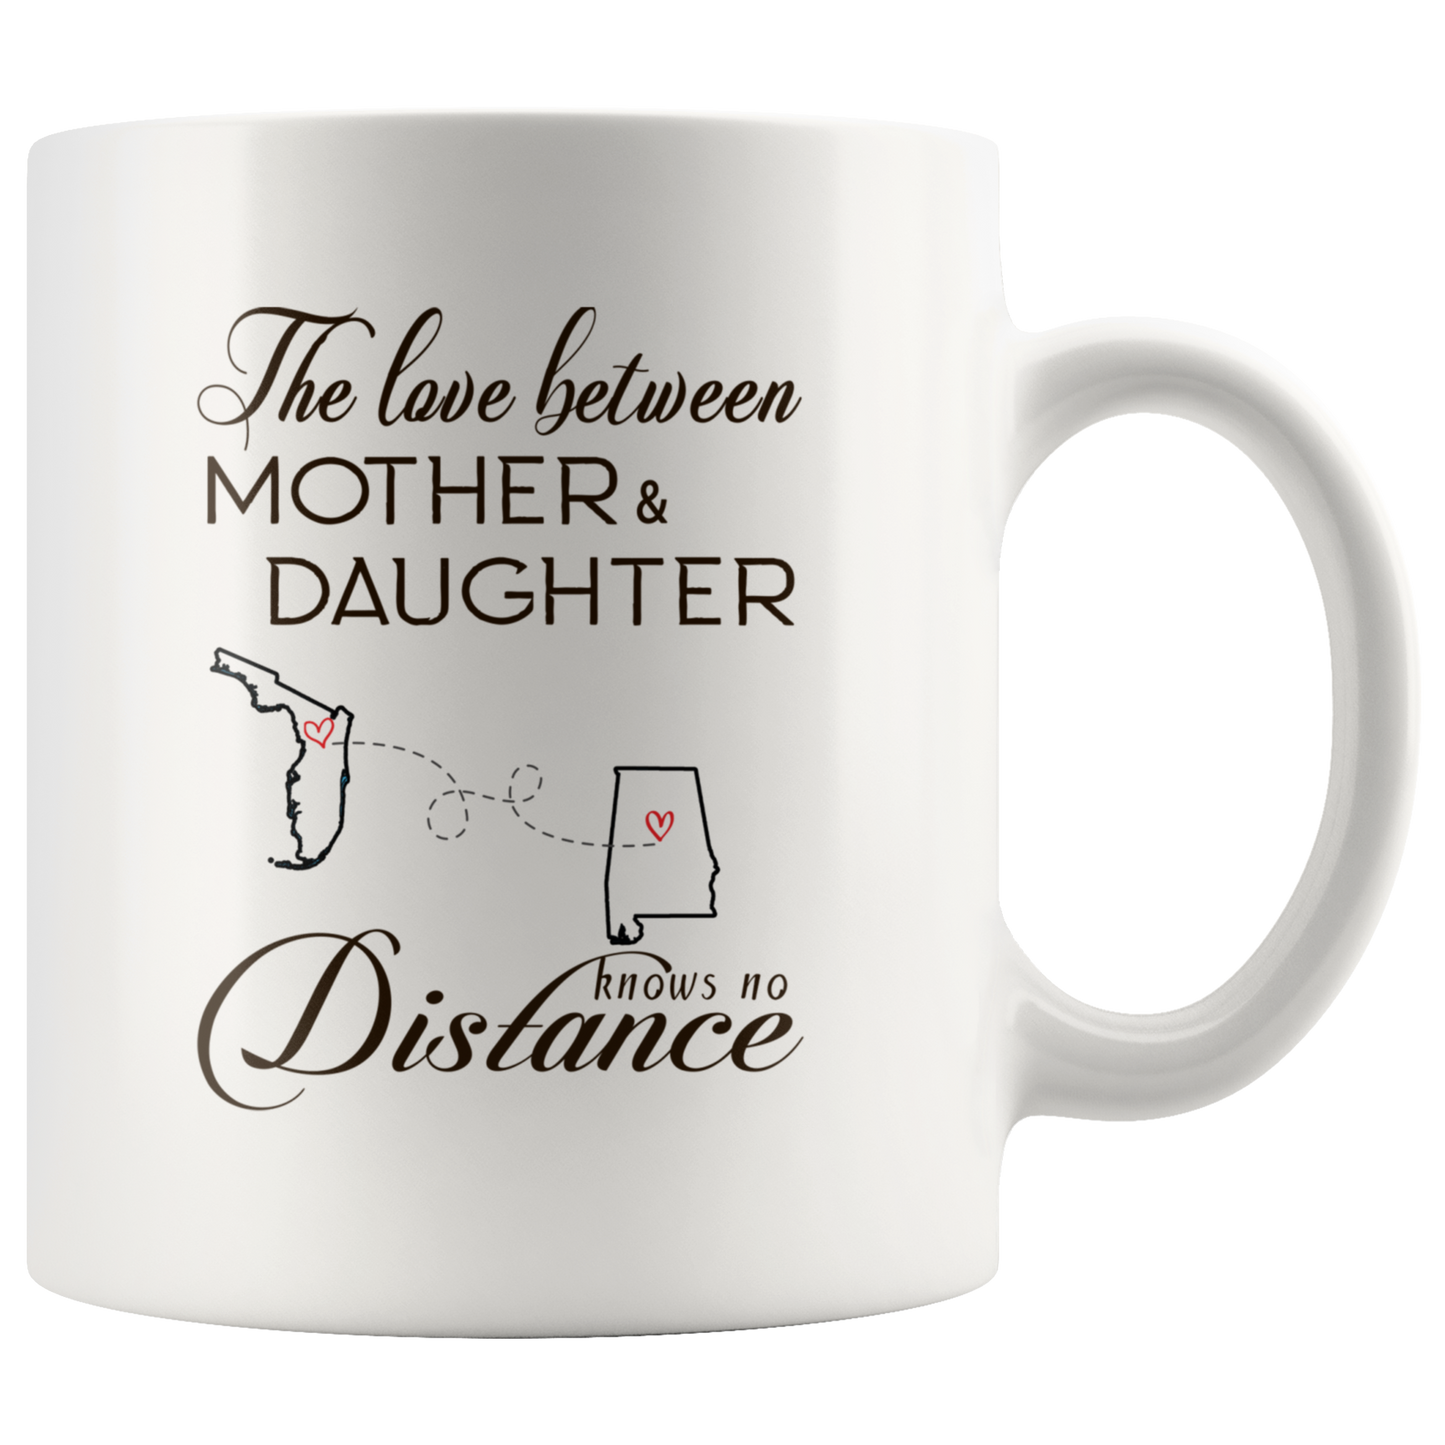 ND-21334465-sp-23396 - Long Distance Accent Mug 11 oz Red - The Love Between Mother